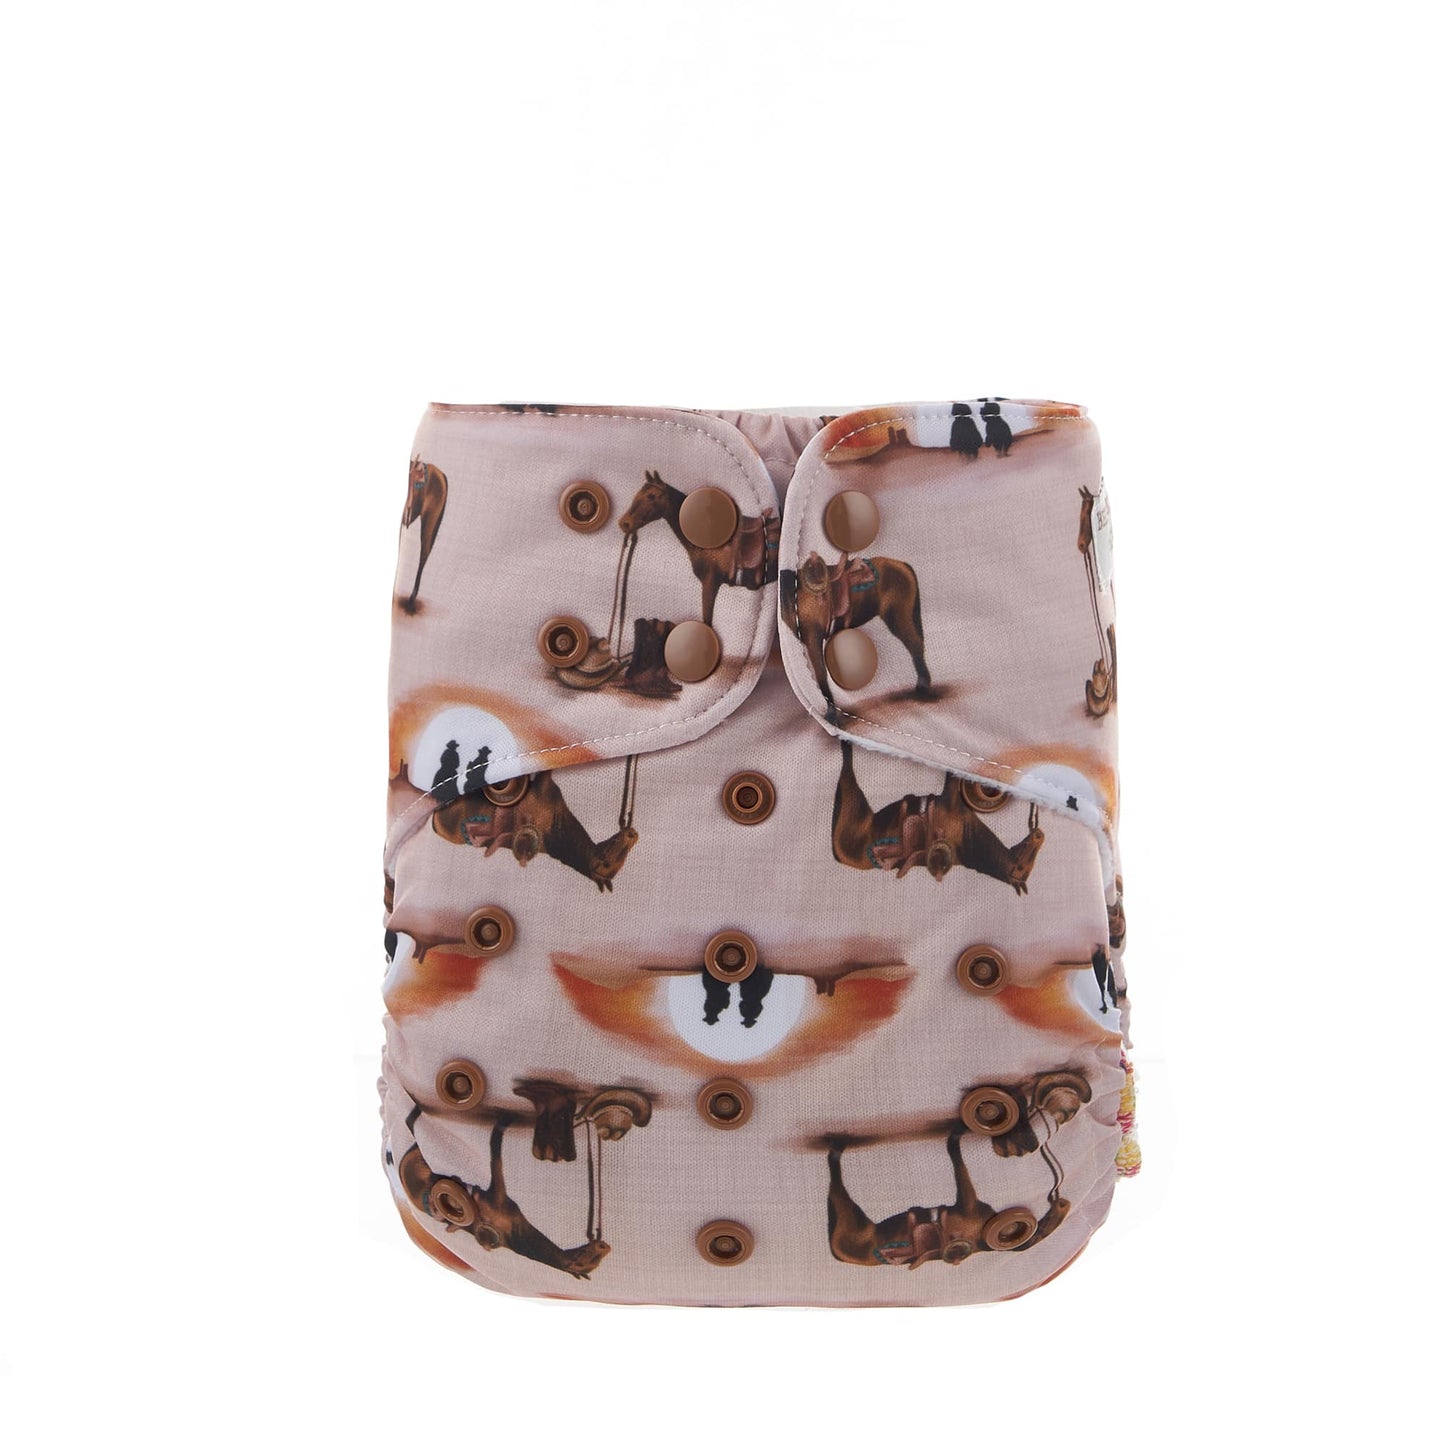 Reusable cloth nappy with a horse and cowboy print.